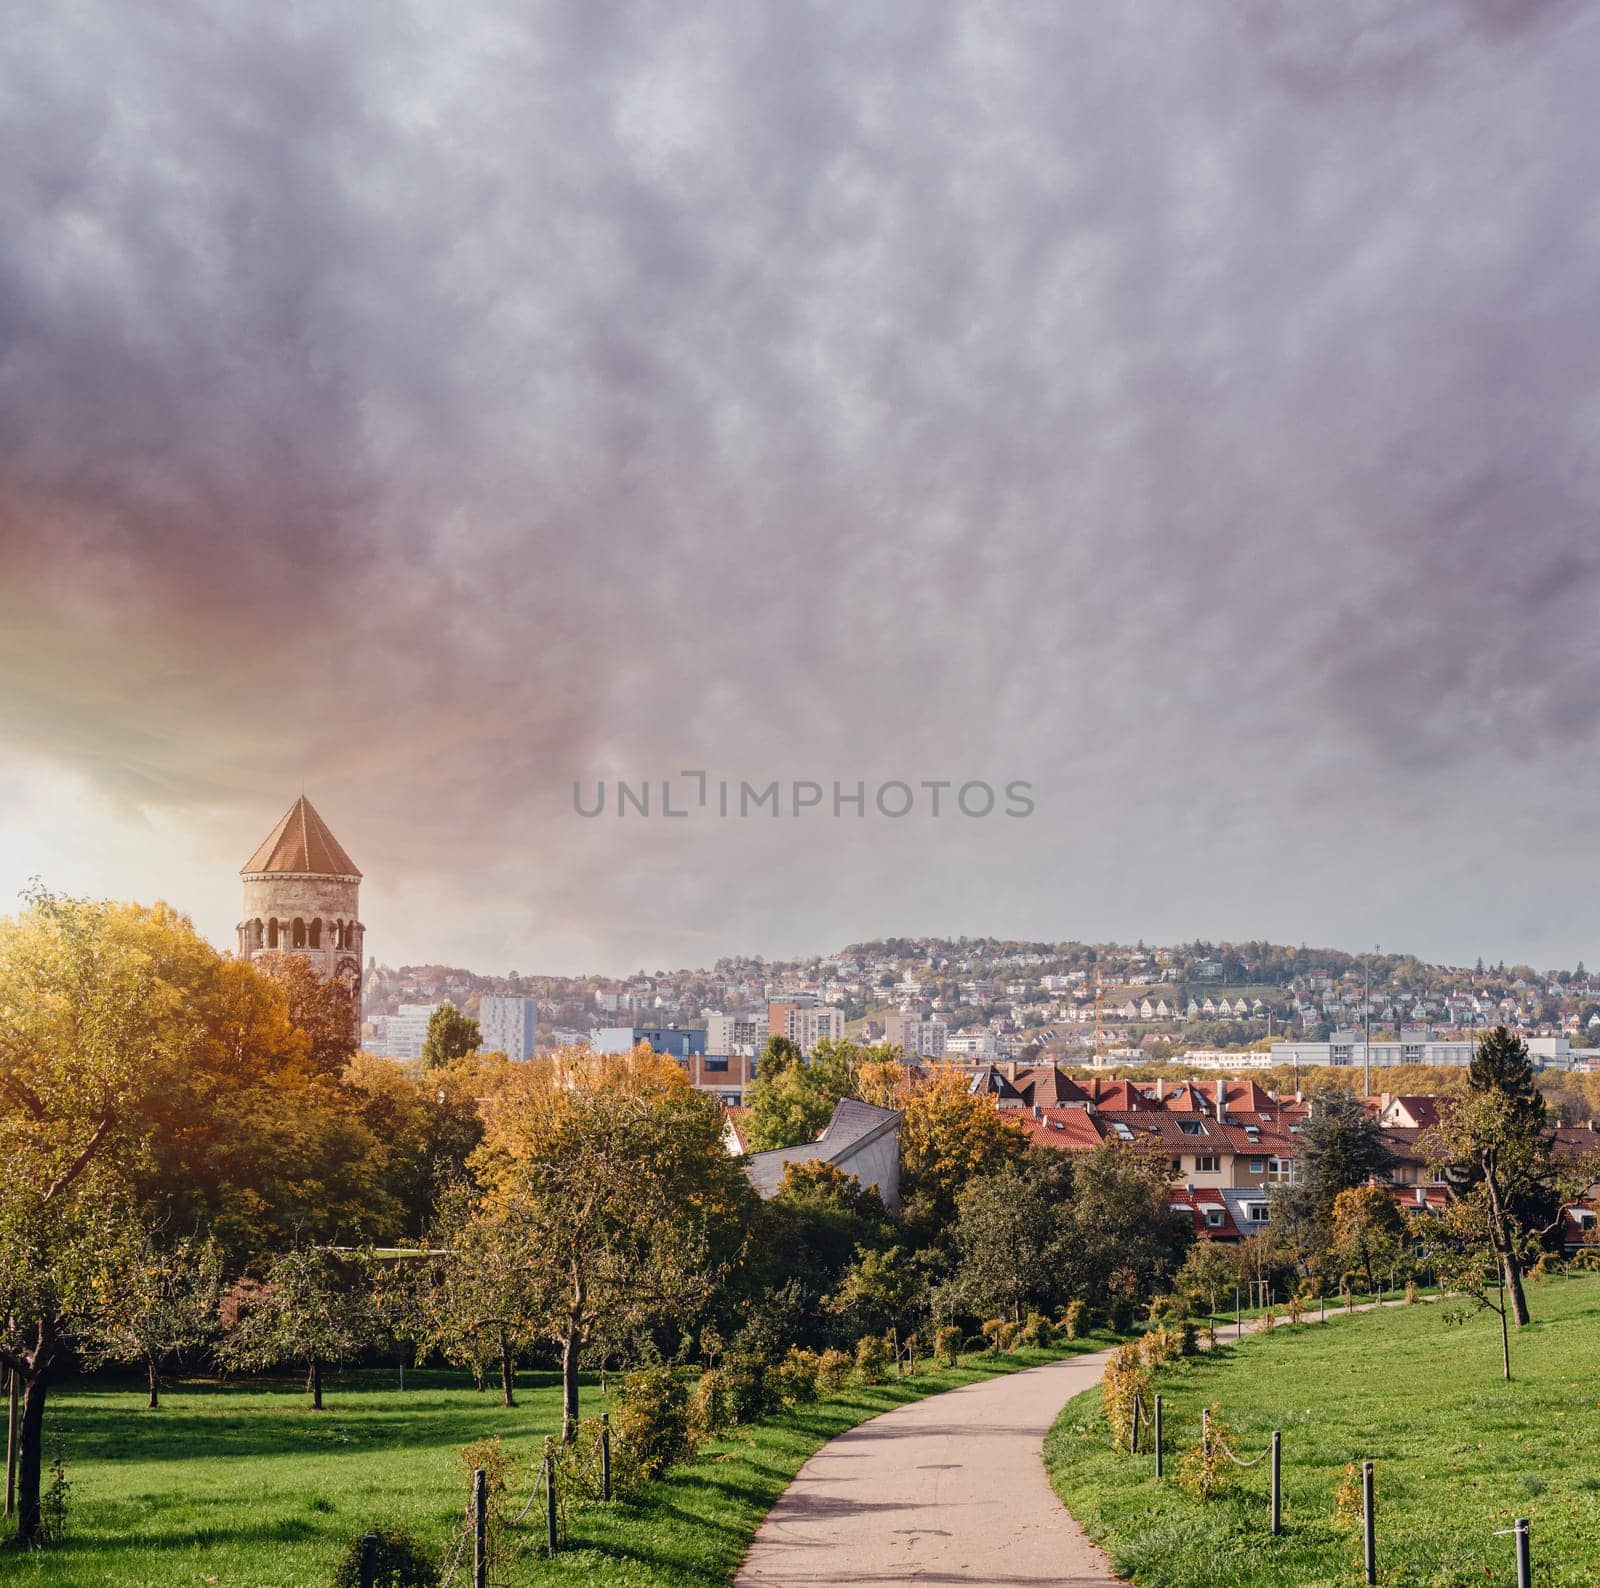 Germany, Stuttgart panorama view. Beautiful houses in autumn, Sky and nature landscape. Vineyards in Stuttgart - colorful wine growing region in the south of Germany with view over Neckar Valley. Germany, Stuttgart city panorama view above vineyards, industry, houses, streets, stadium and highway at sunset in warm orange light by Andrii_Ko